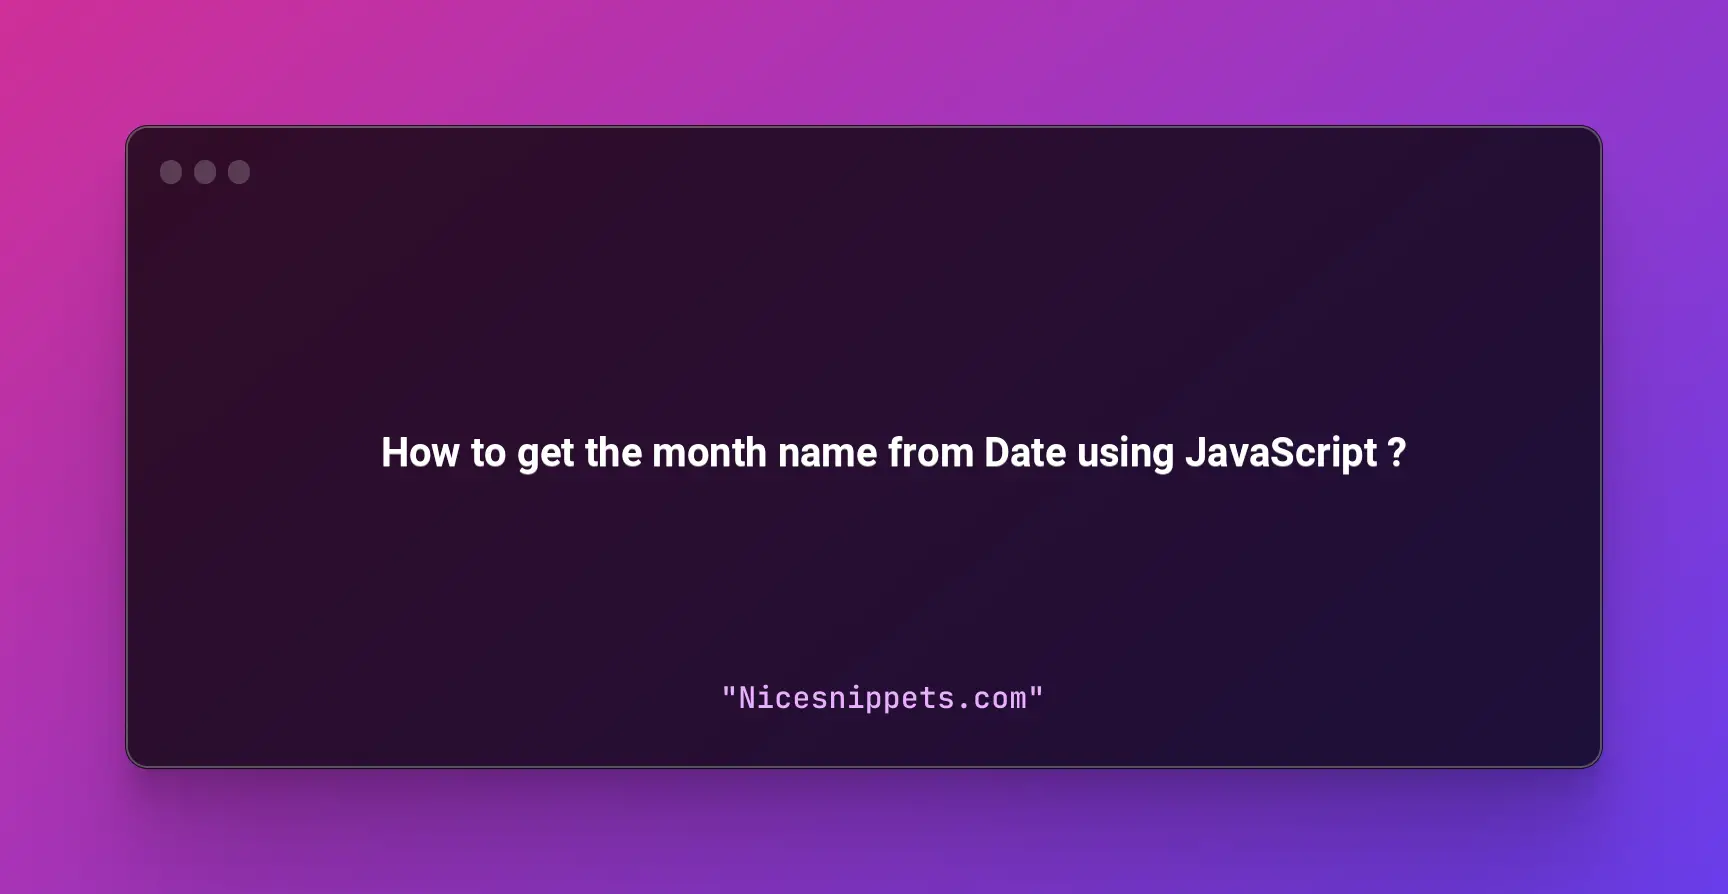 How to get the month name from Date using JavaScript?